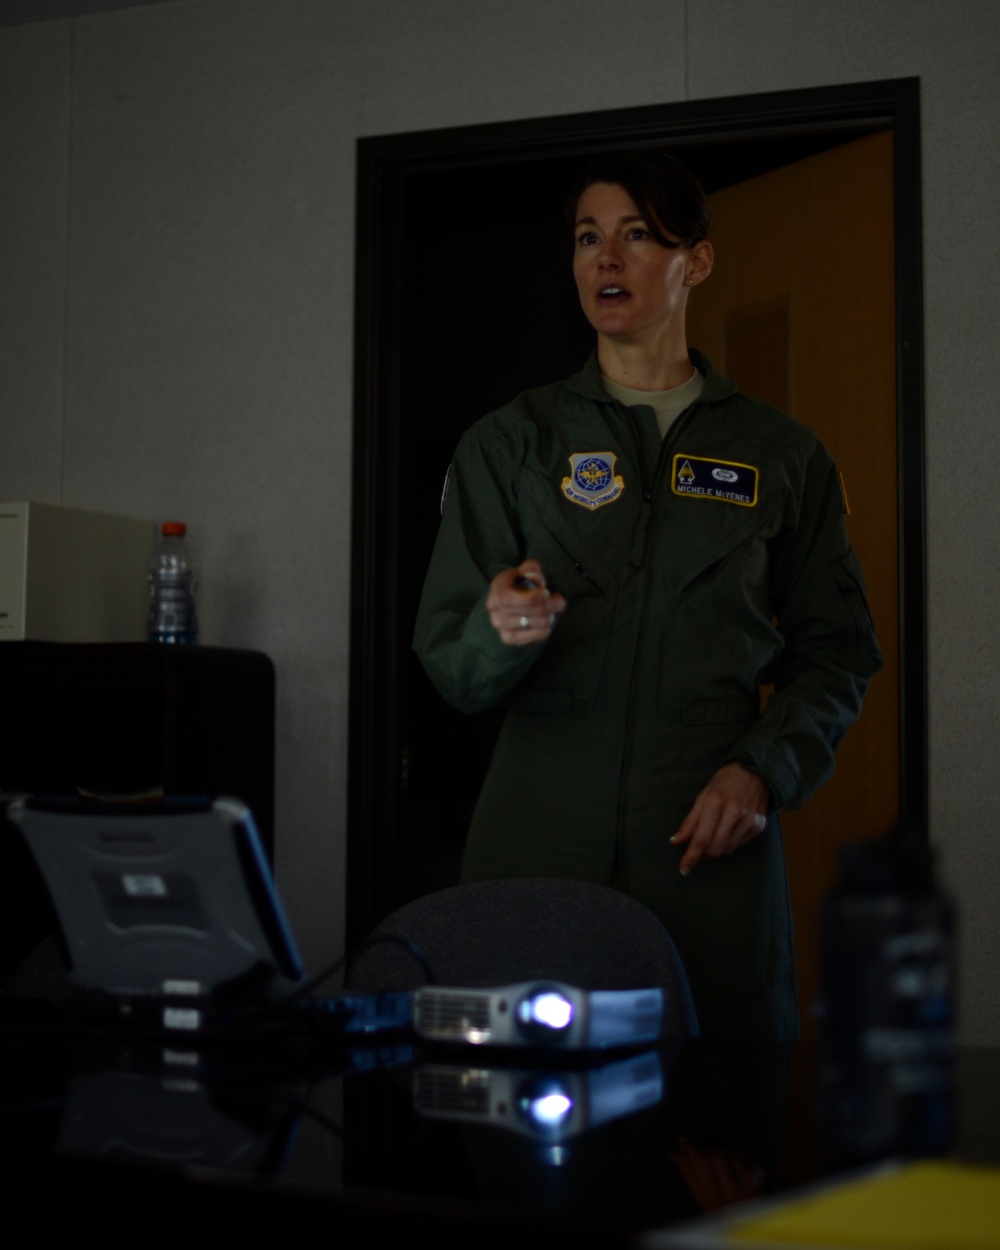 133rd AW conducts training in Yuma